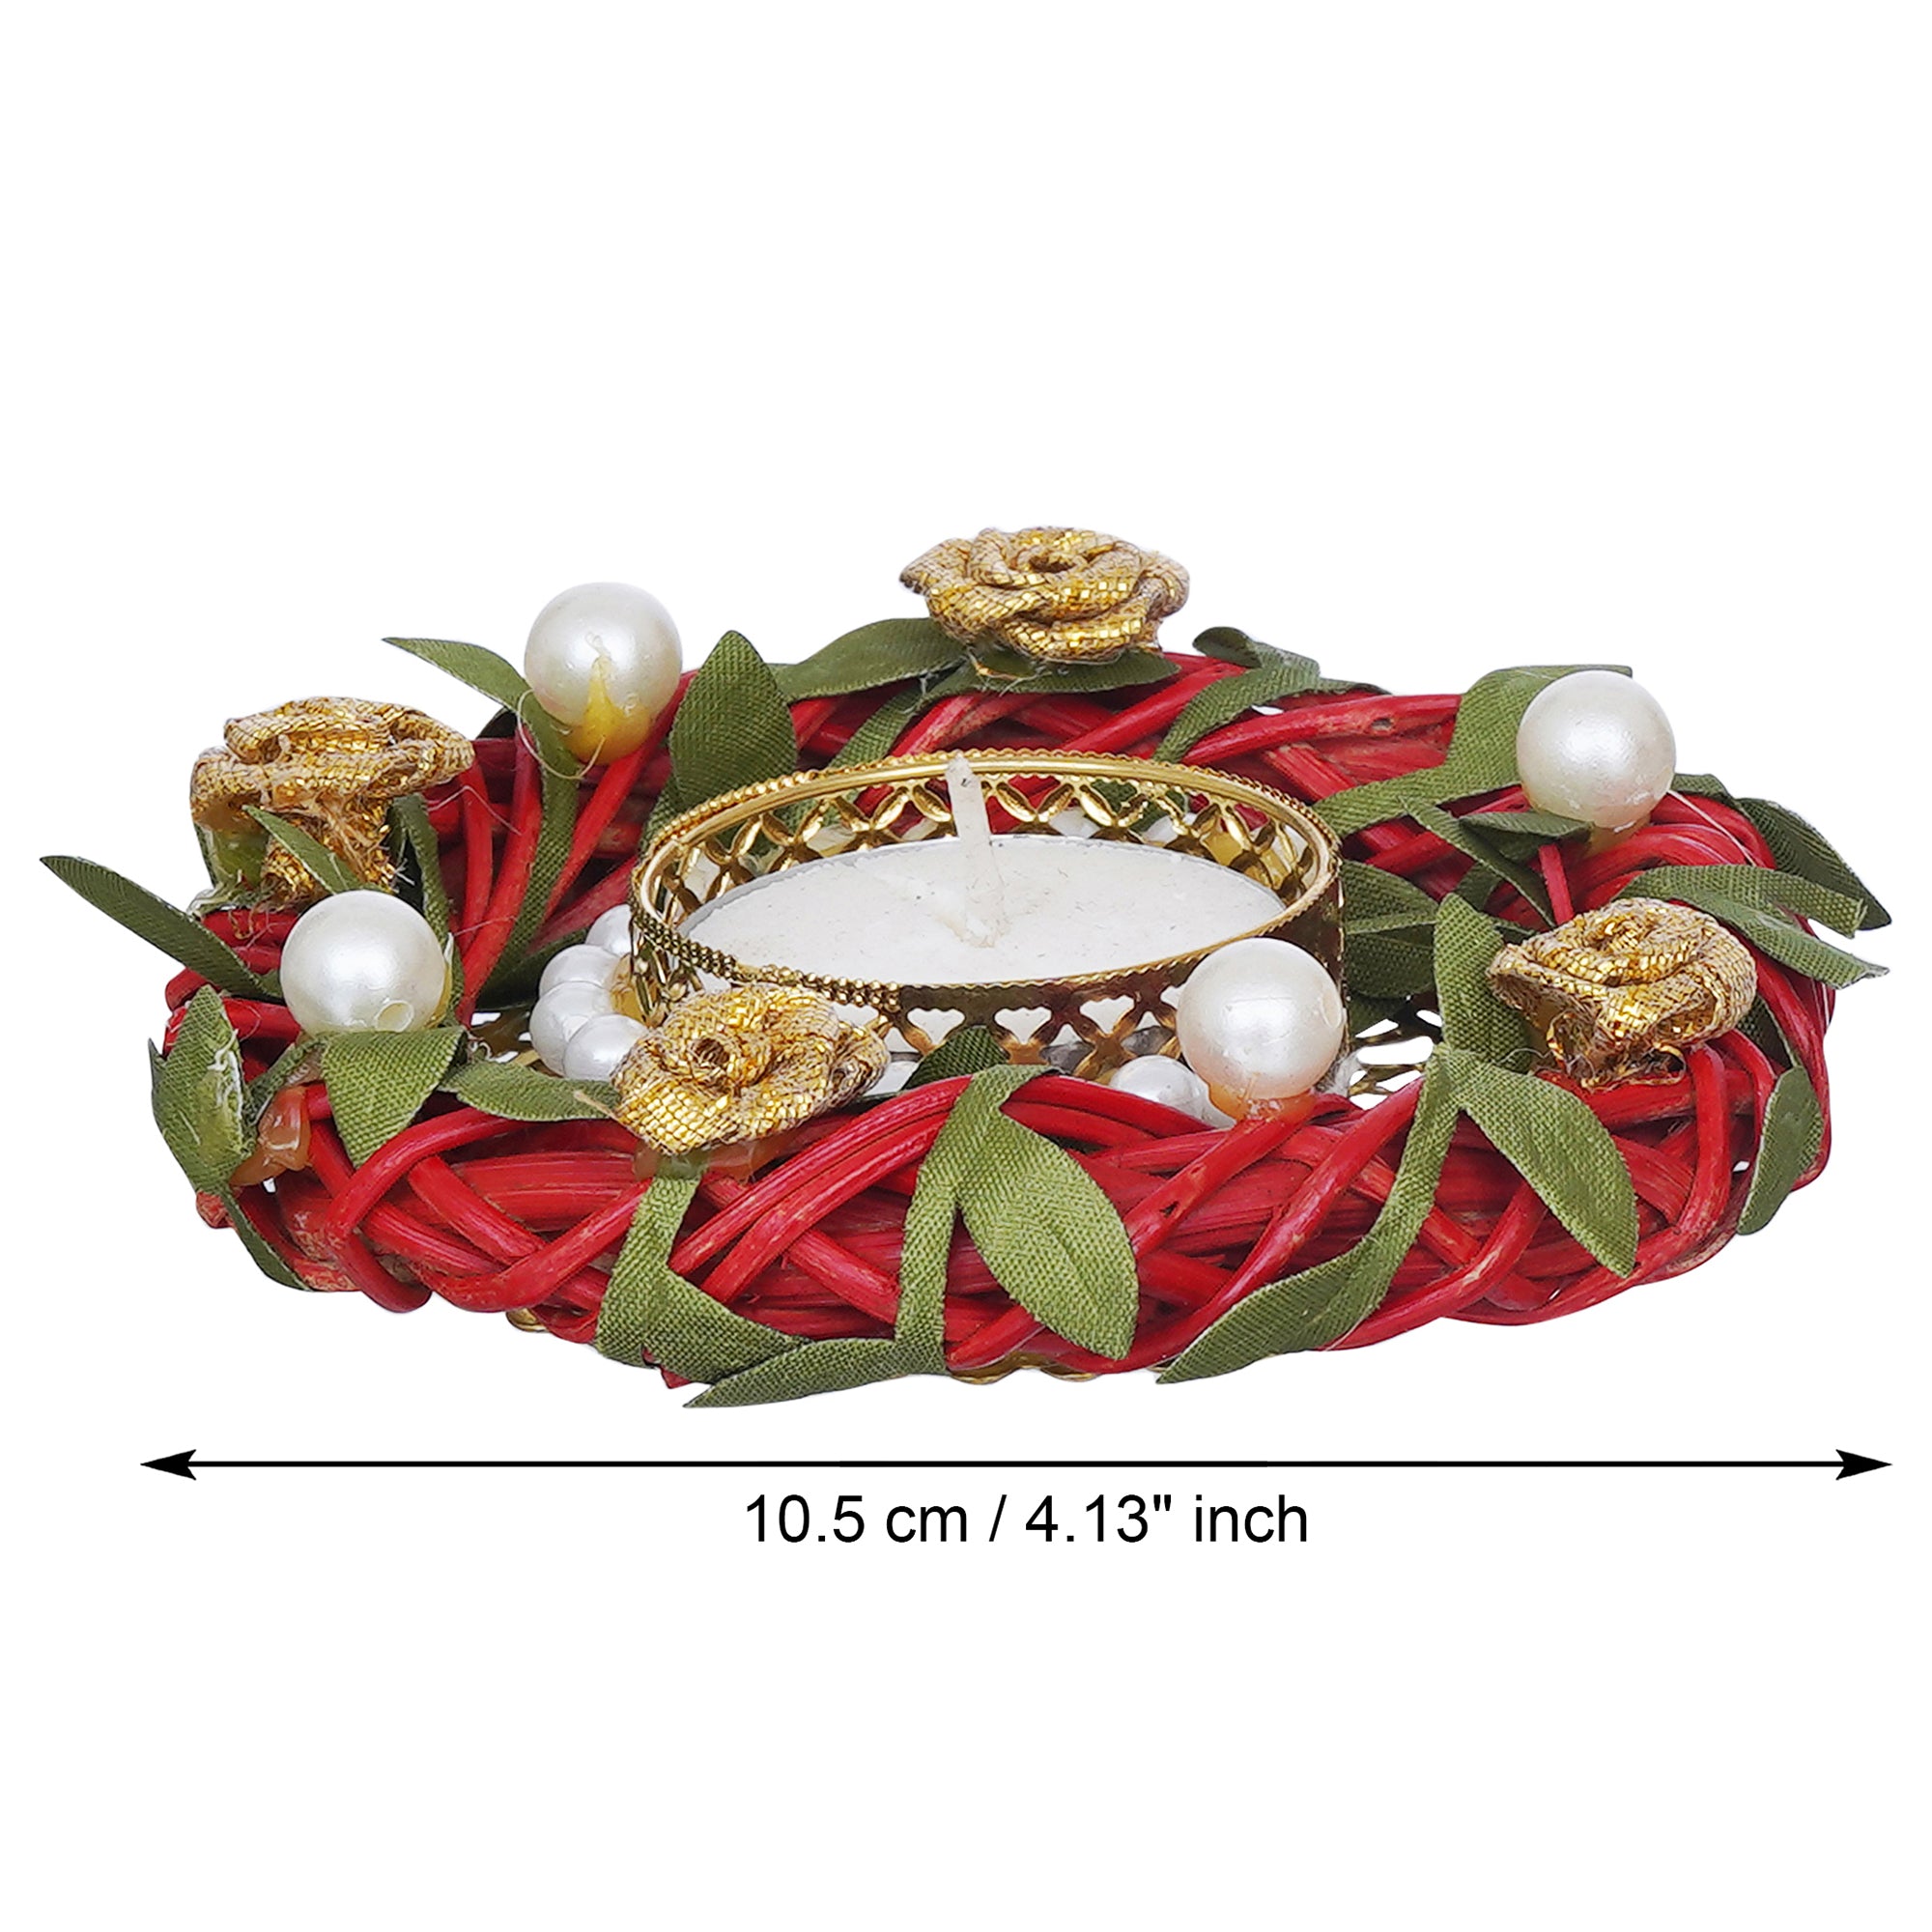 eCraftIndia Floral & Pearl Beads Handcrafted Decorative Tea Light Candle Holder 3